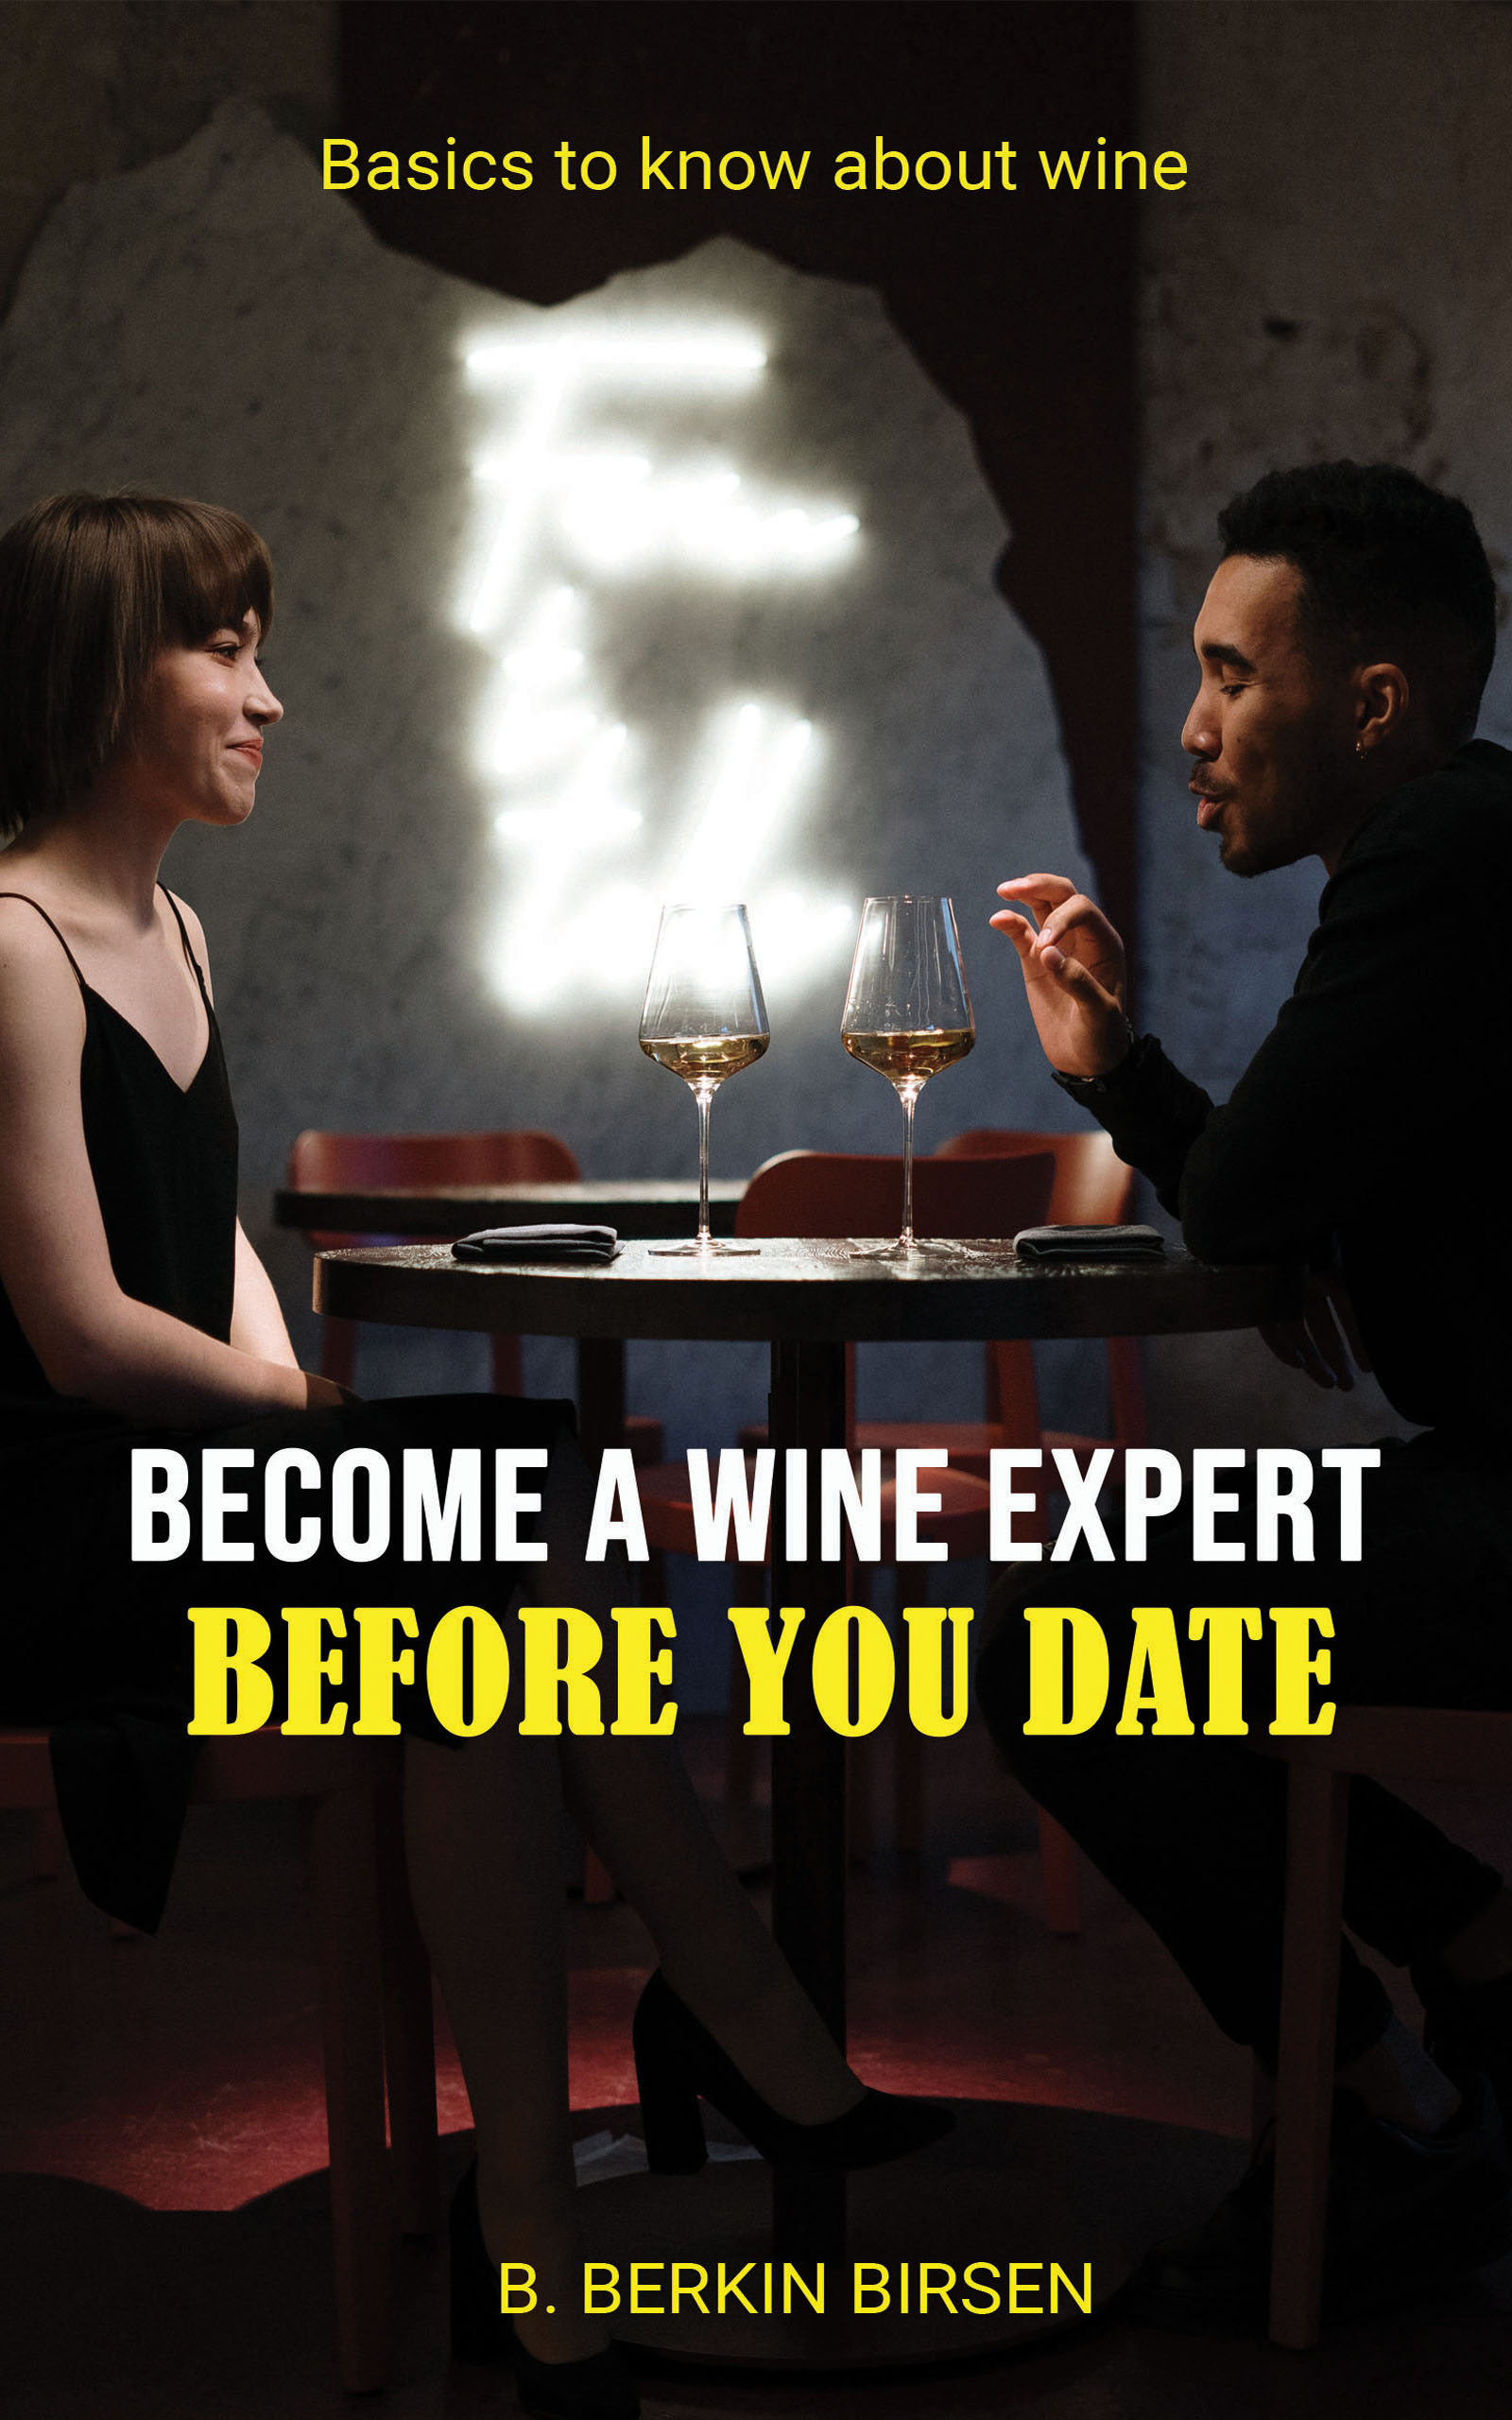 FREE: ECOME A WINE EXPERT BEFORE YOU DATE: BASICS TO KNOW ABOUT WINE by Berkin Birsen